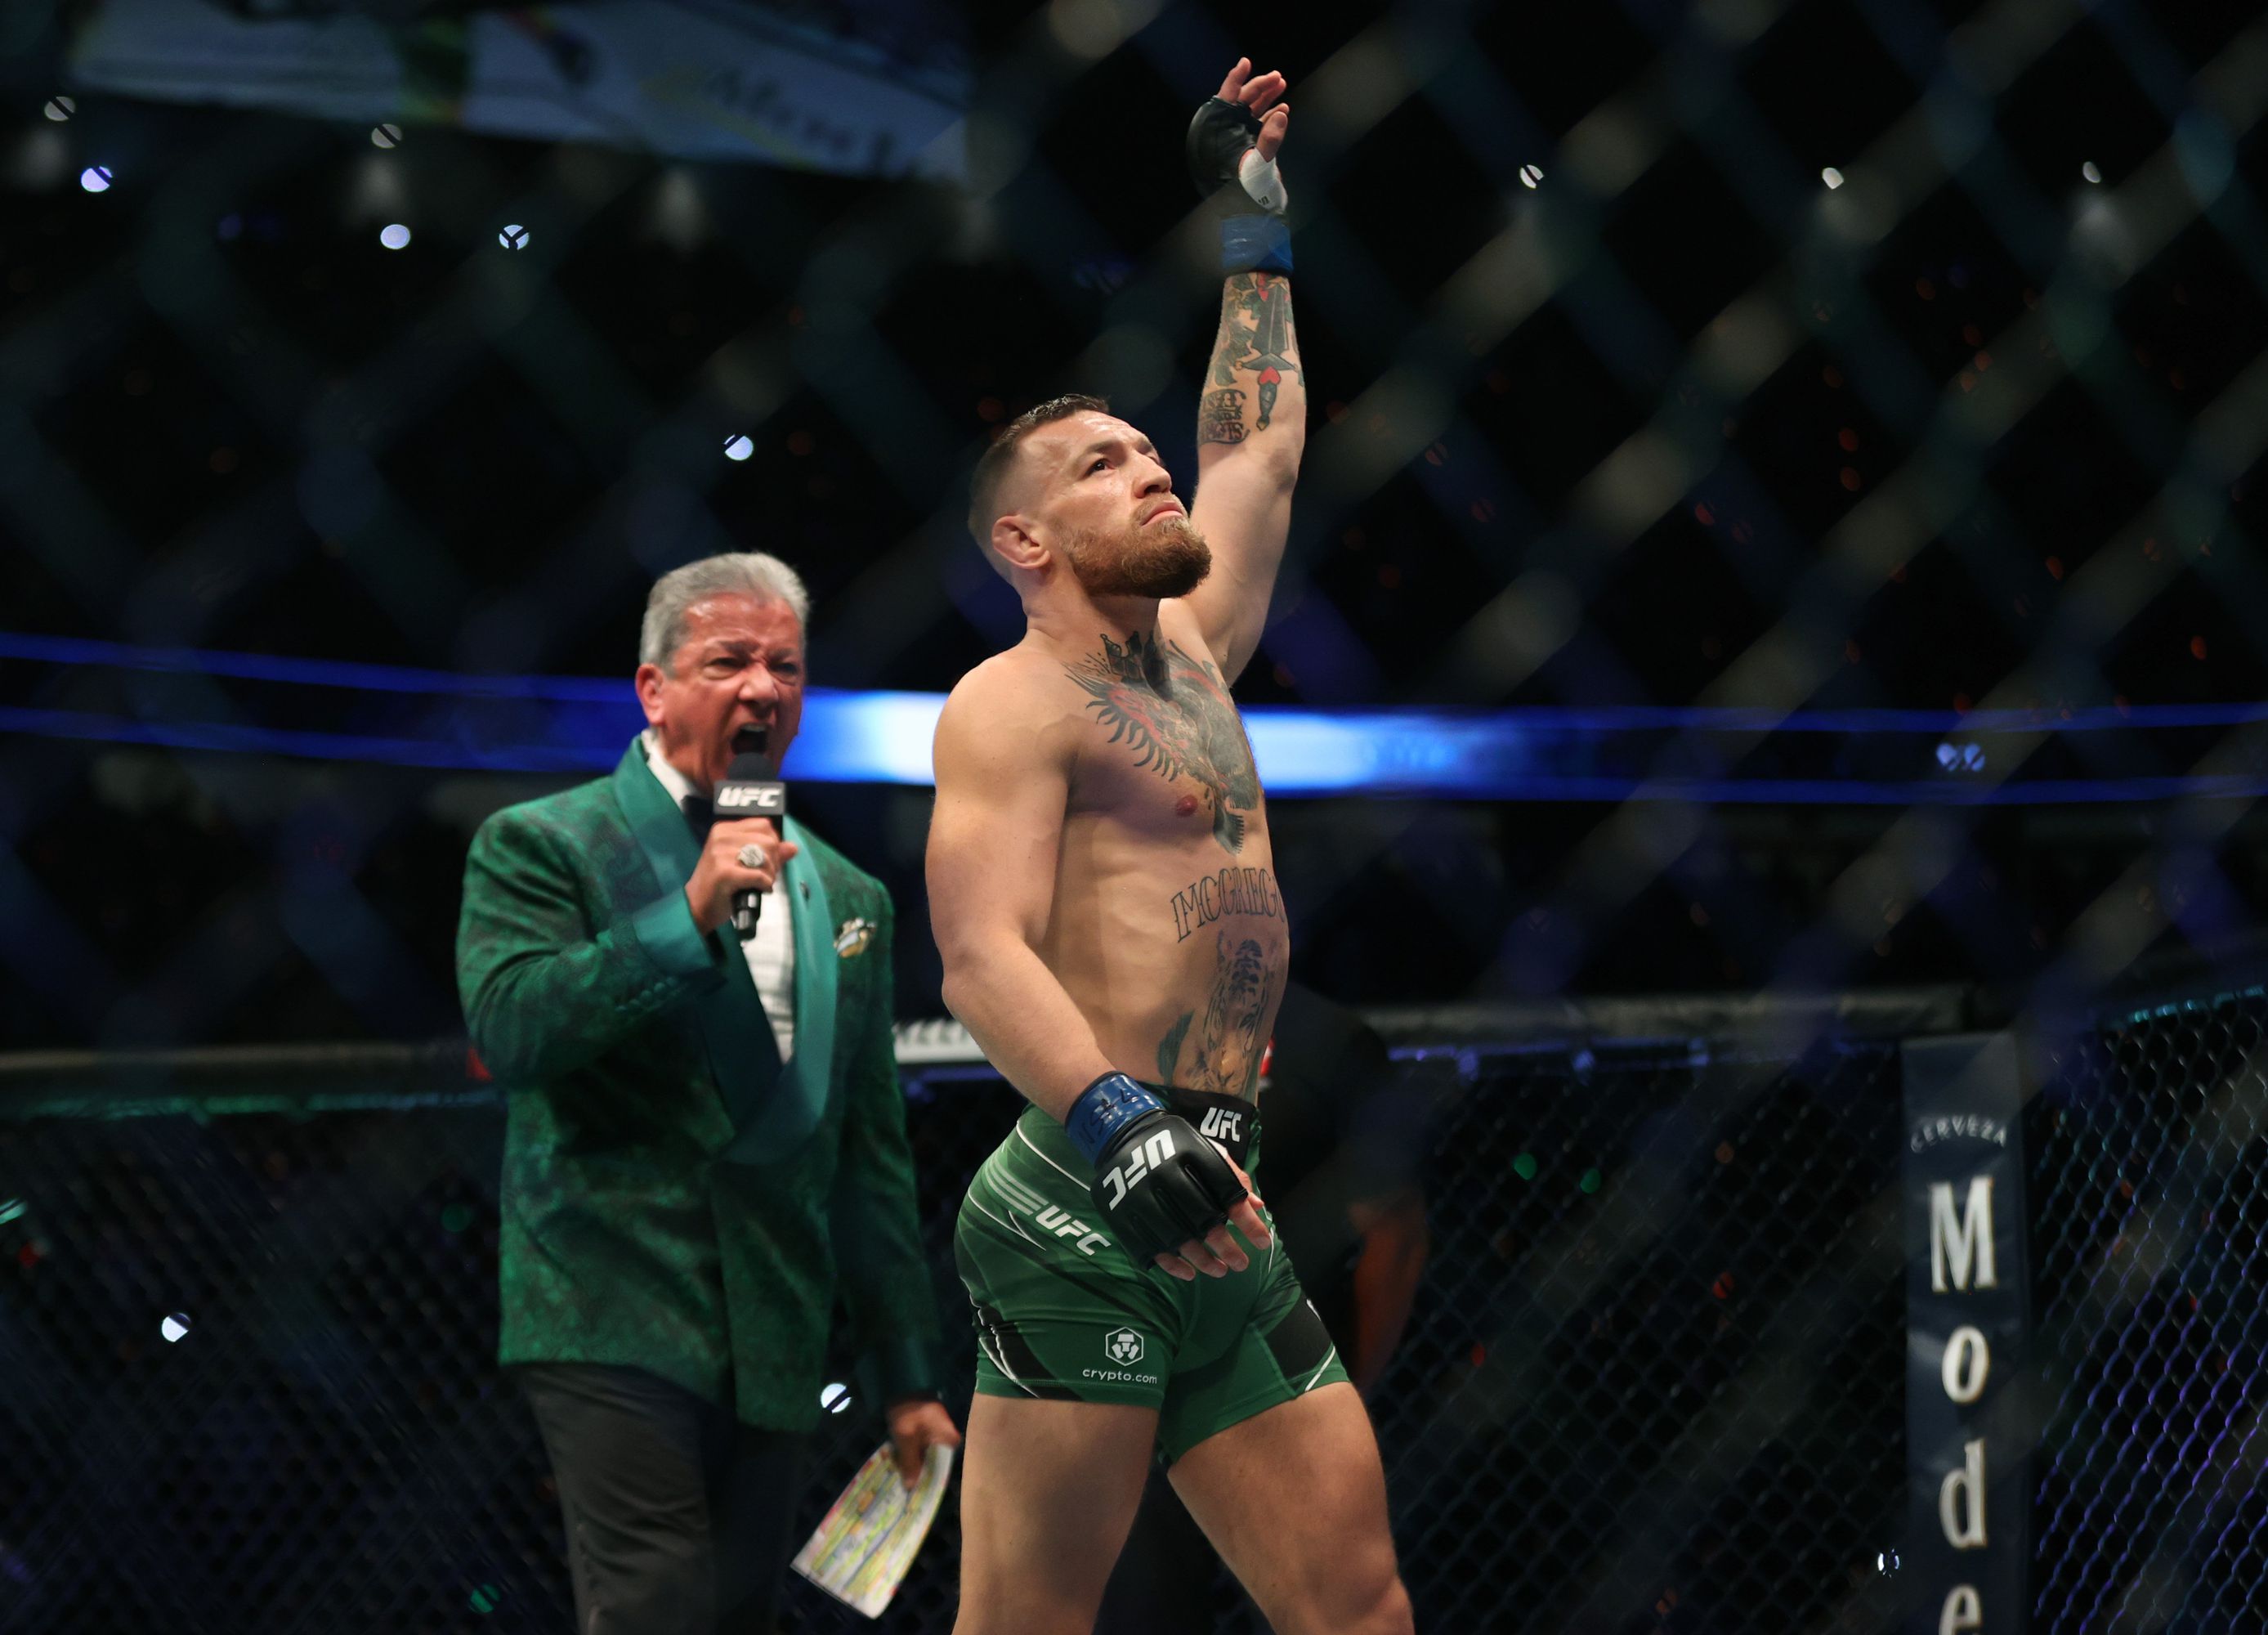 MMAFighting.com Chimaev's coach: Conor McGregor joining forces would be 'best thing he can do for his life today'